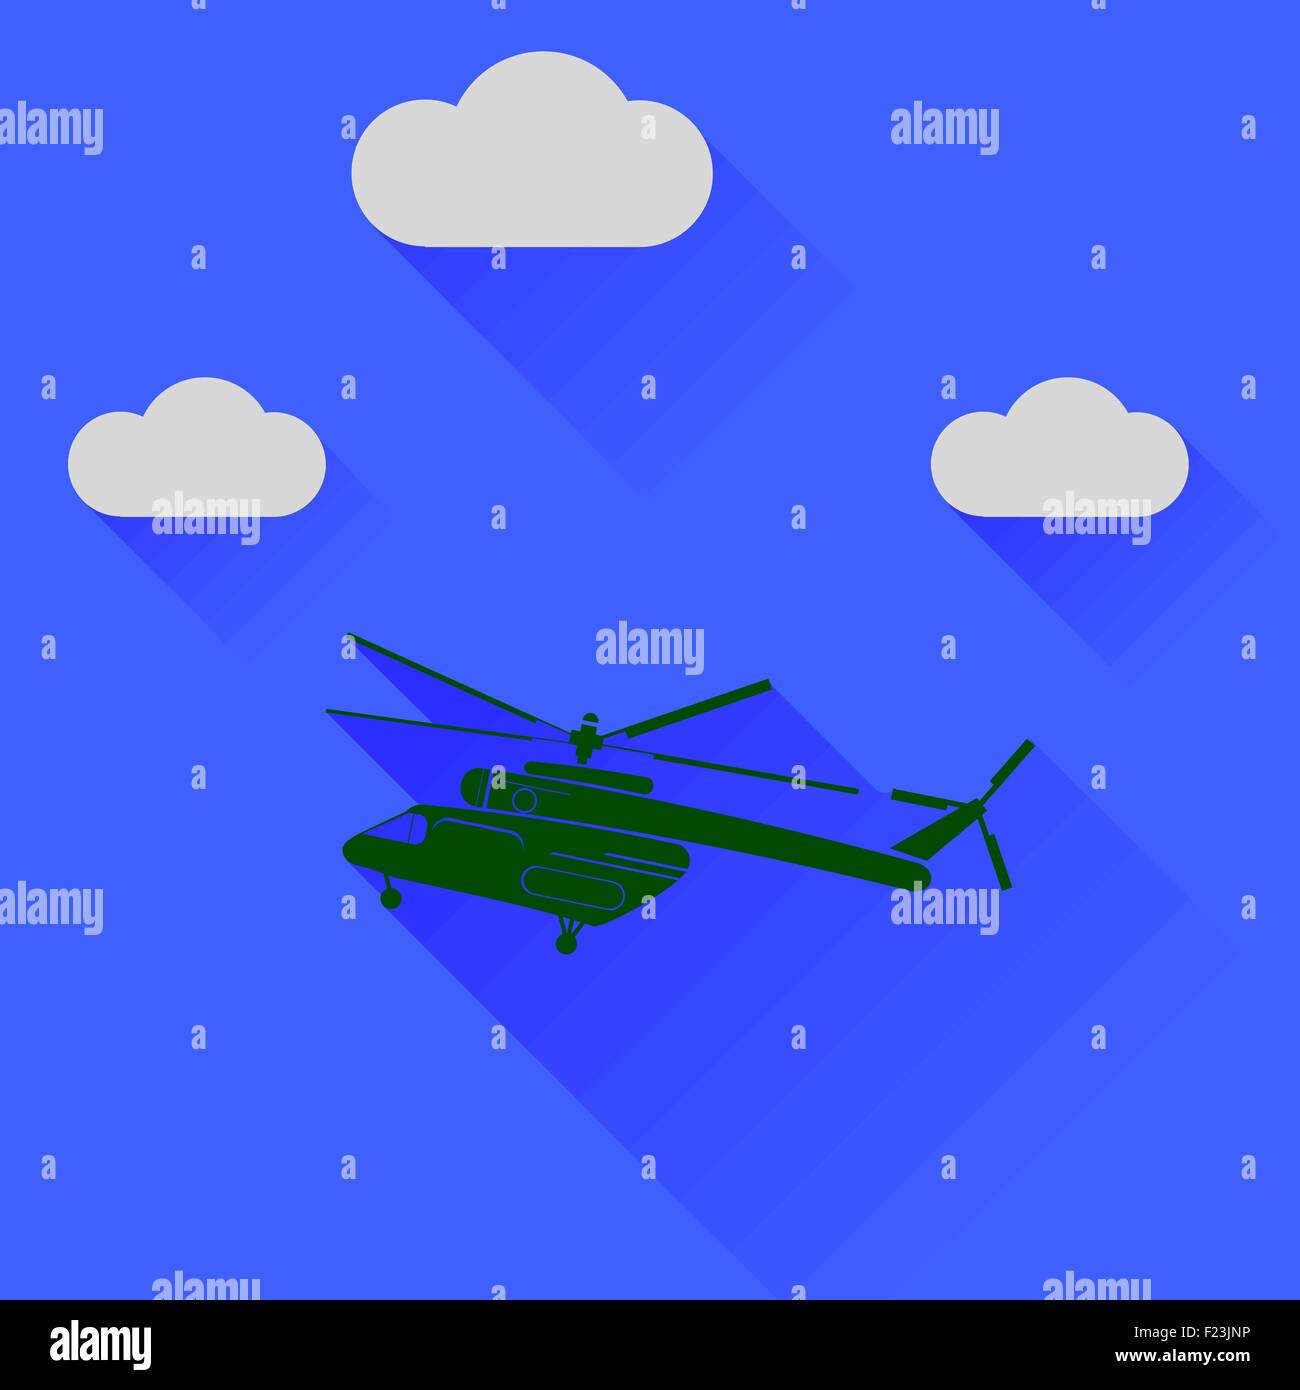 Green Helicopter Silhouette Stock Vector